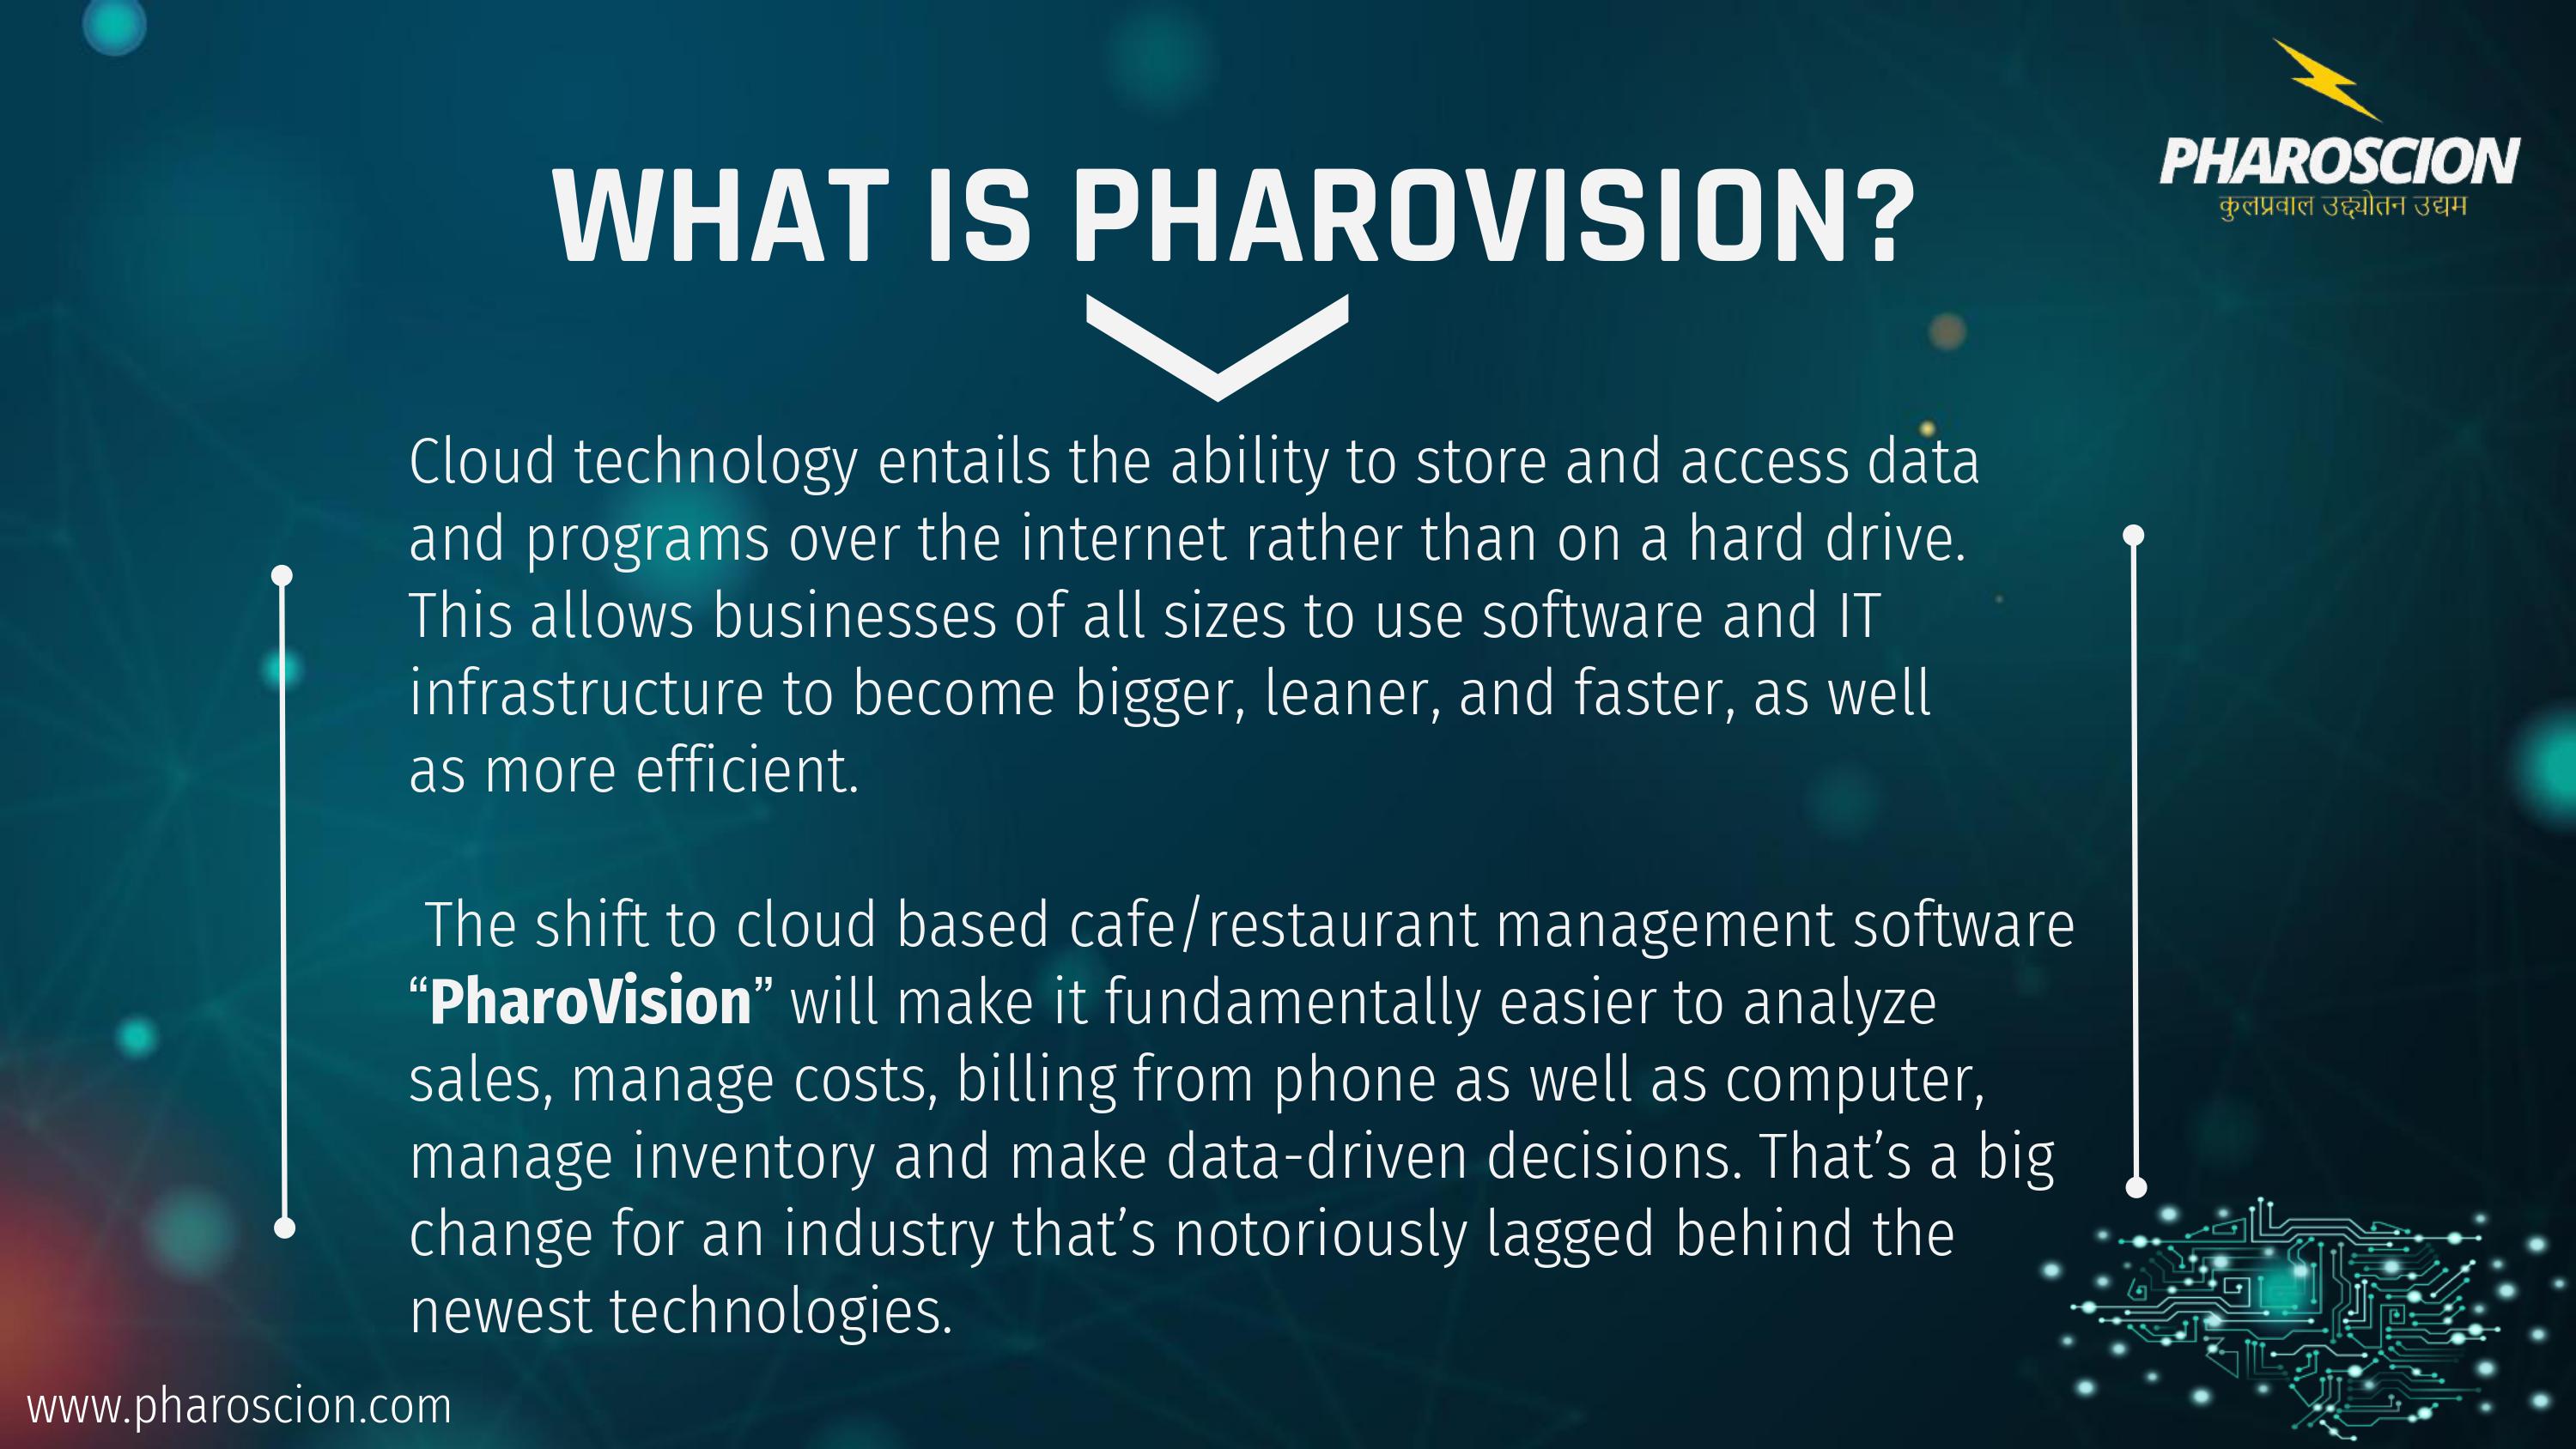 Find detailed information about PharoVision